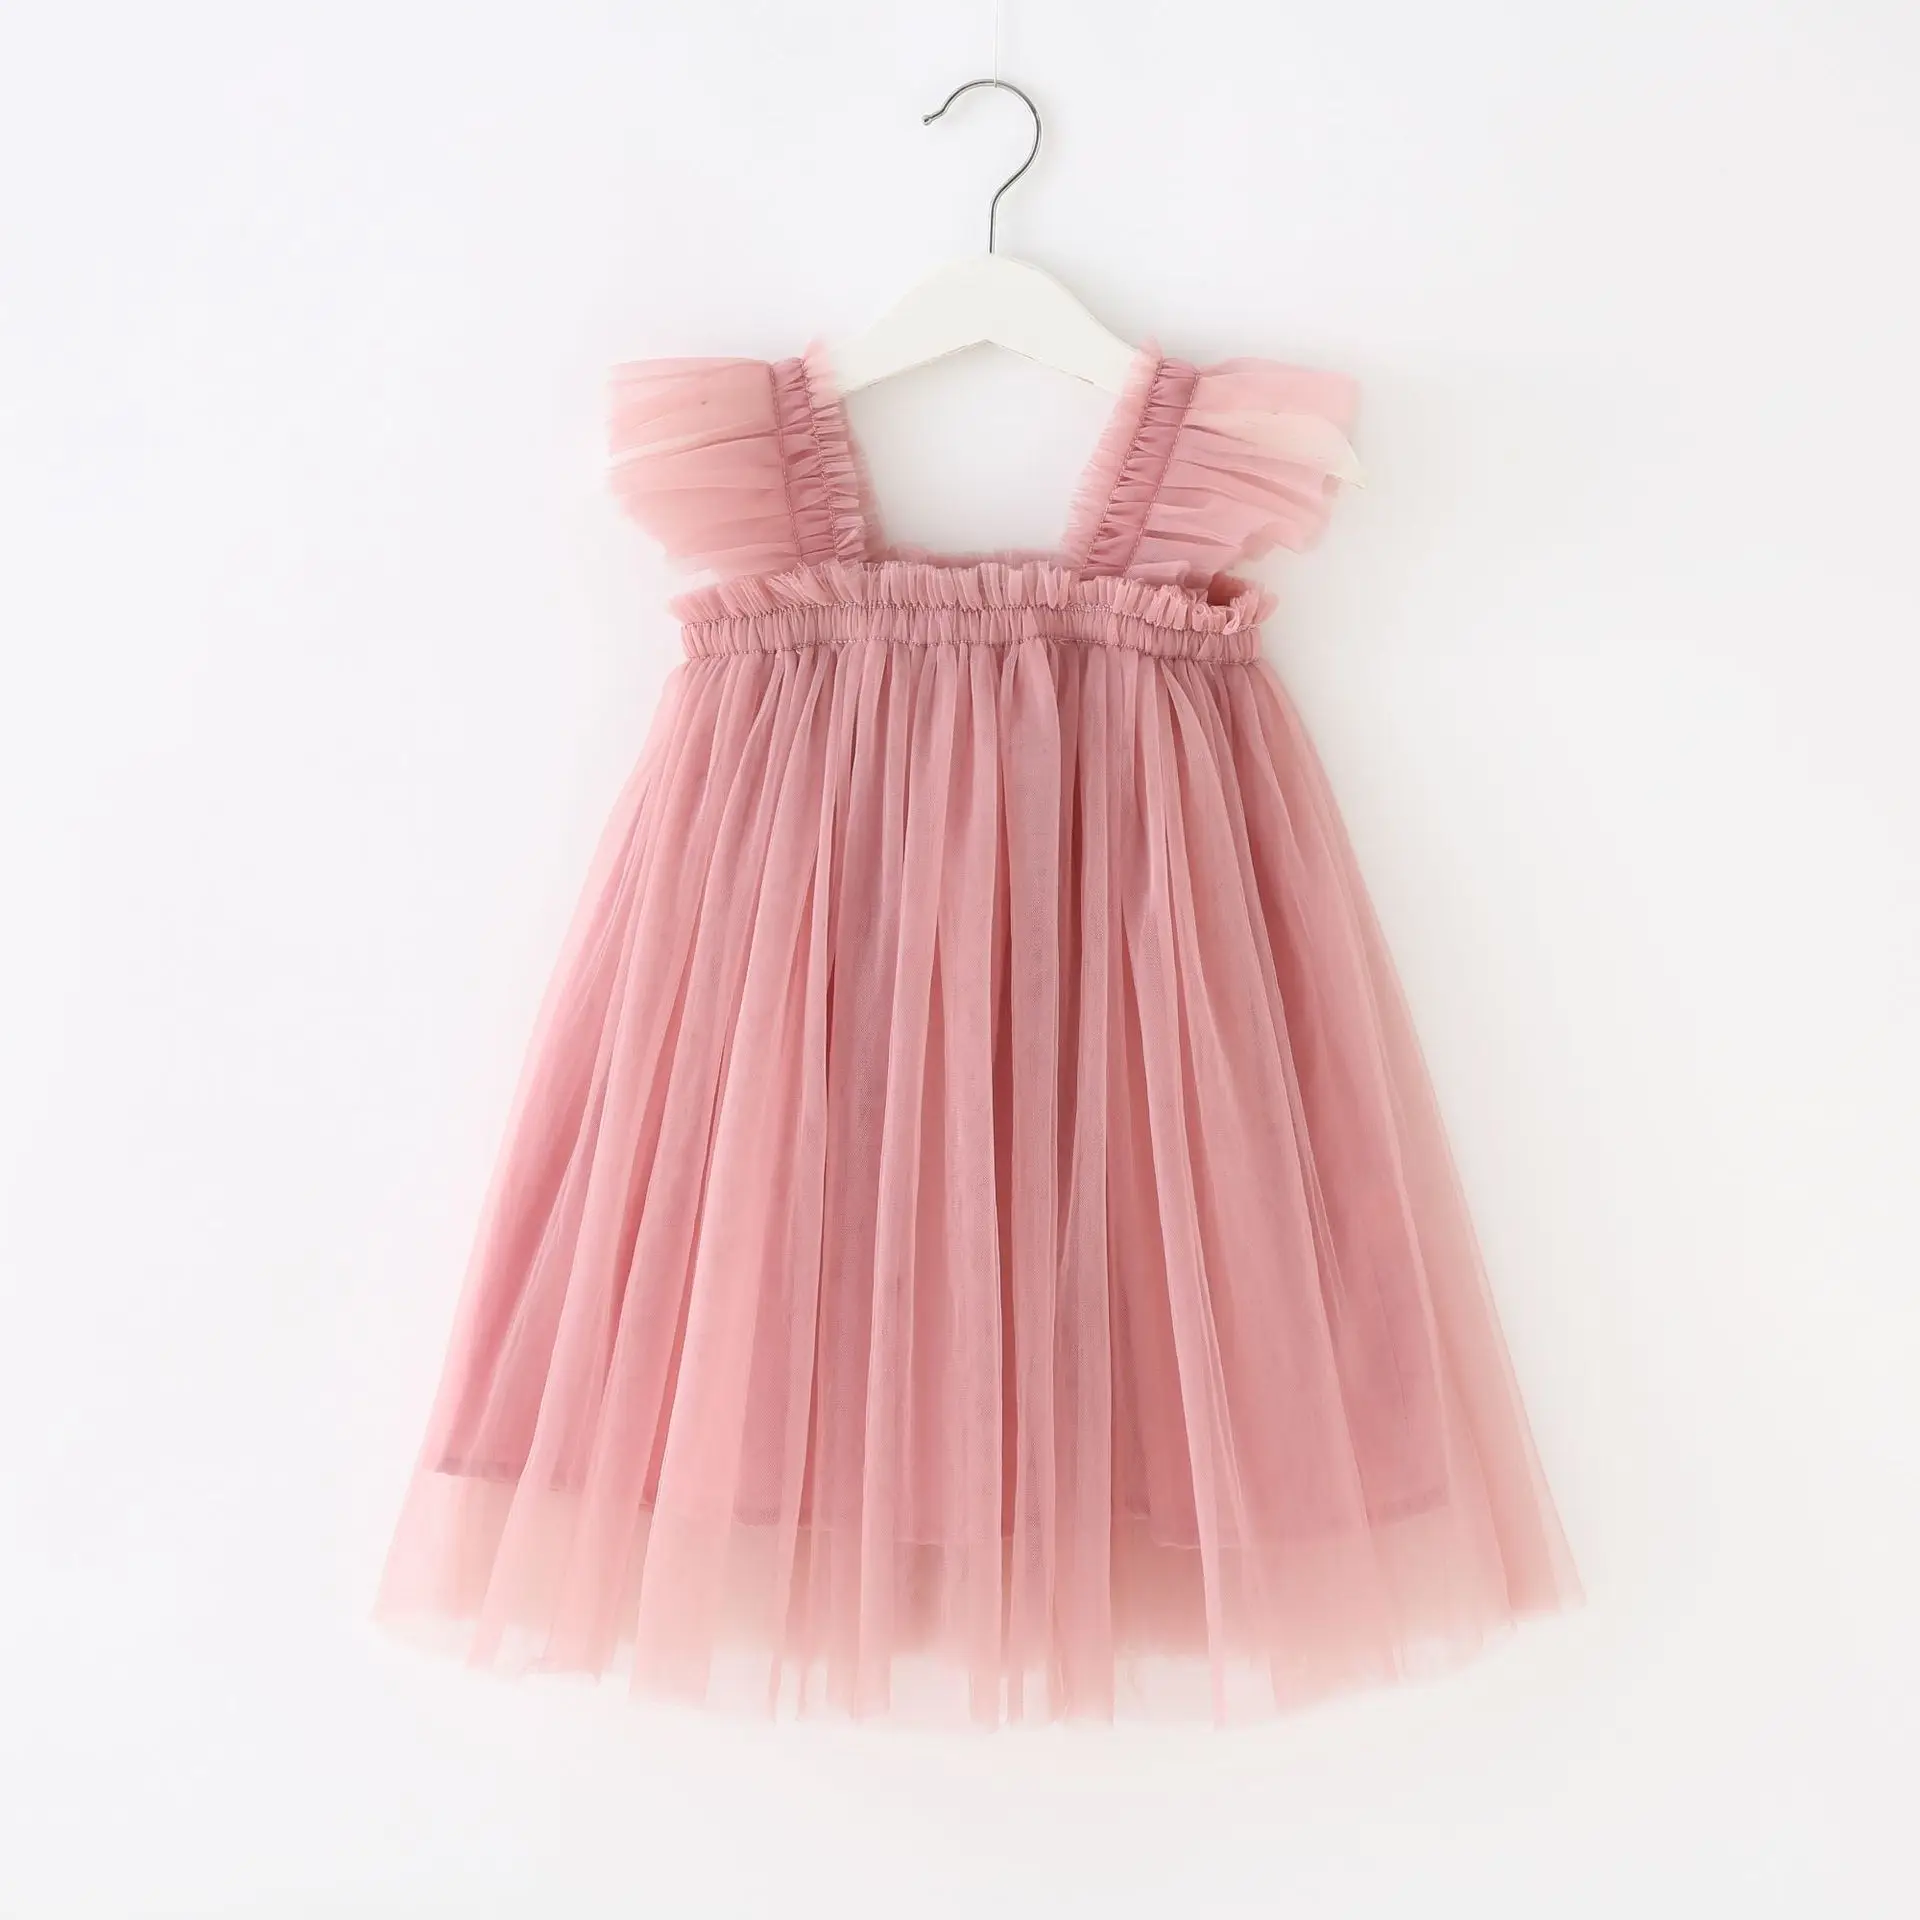 2023 Girls Flutter Sleeve Dress Casual Costumes for Toddlers Girls Luxury Girl Children's Party Candy Color Tutu Fairy Dress enlarge